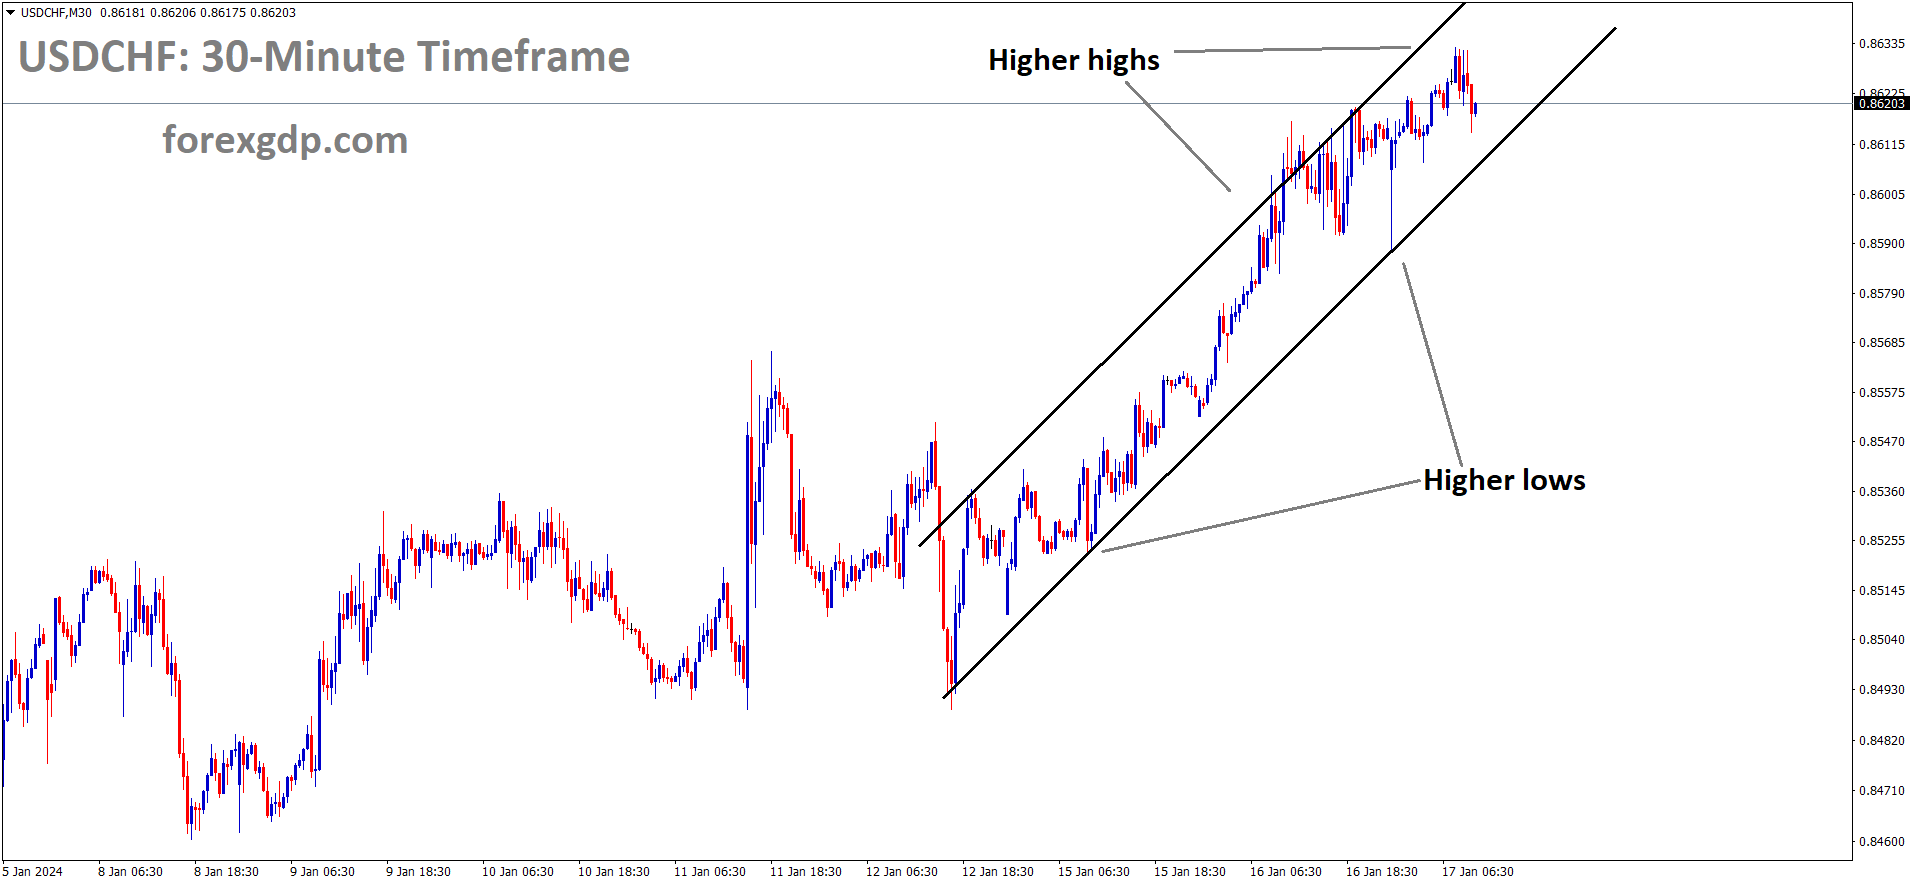 USDCHF is moving in an Ascending channel and the market has fallen from the higher high area of the channel 1